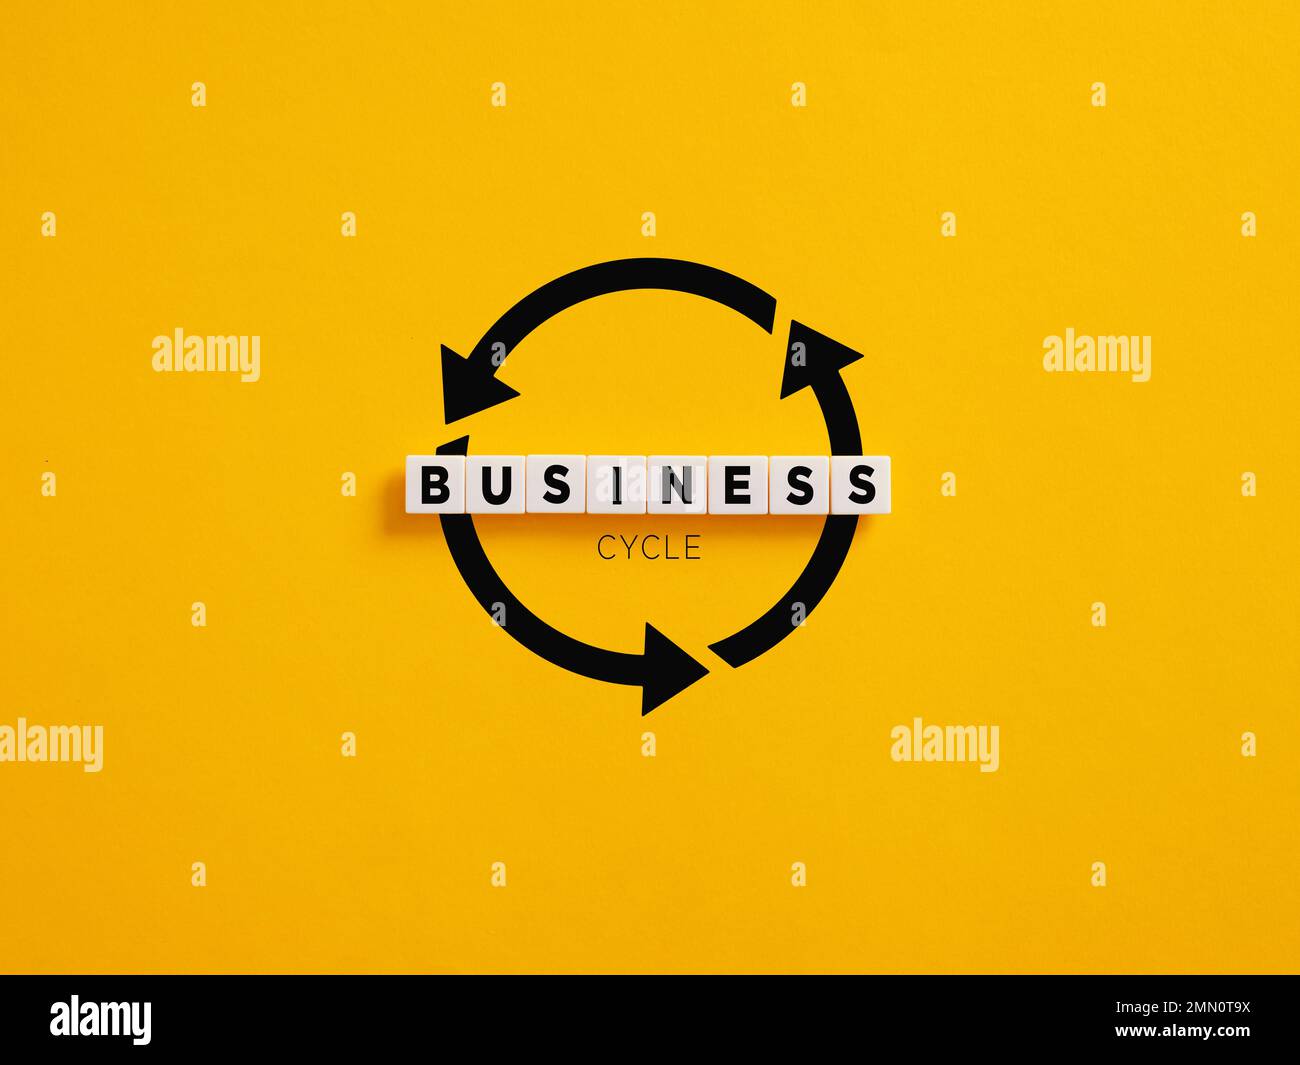 Business cycle concept on white letter blocks on yellow background. Intervals of expansion followed by recession in economic activity. Stock Photo